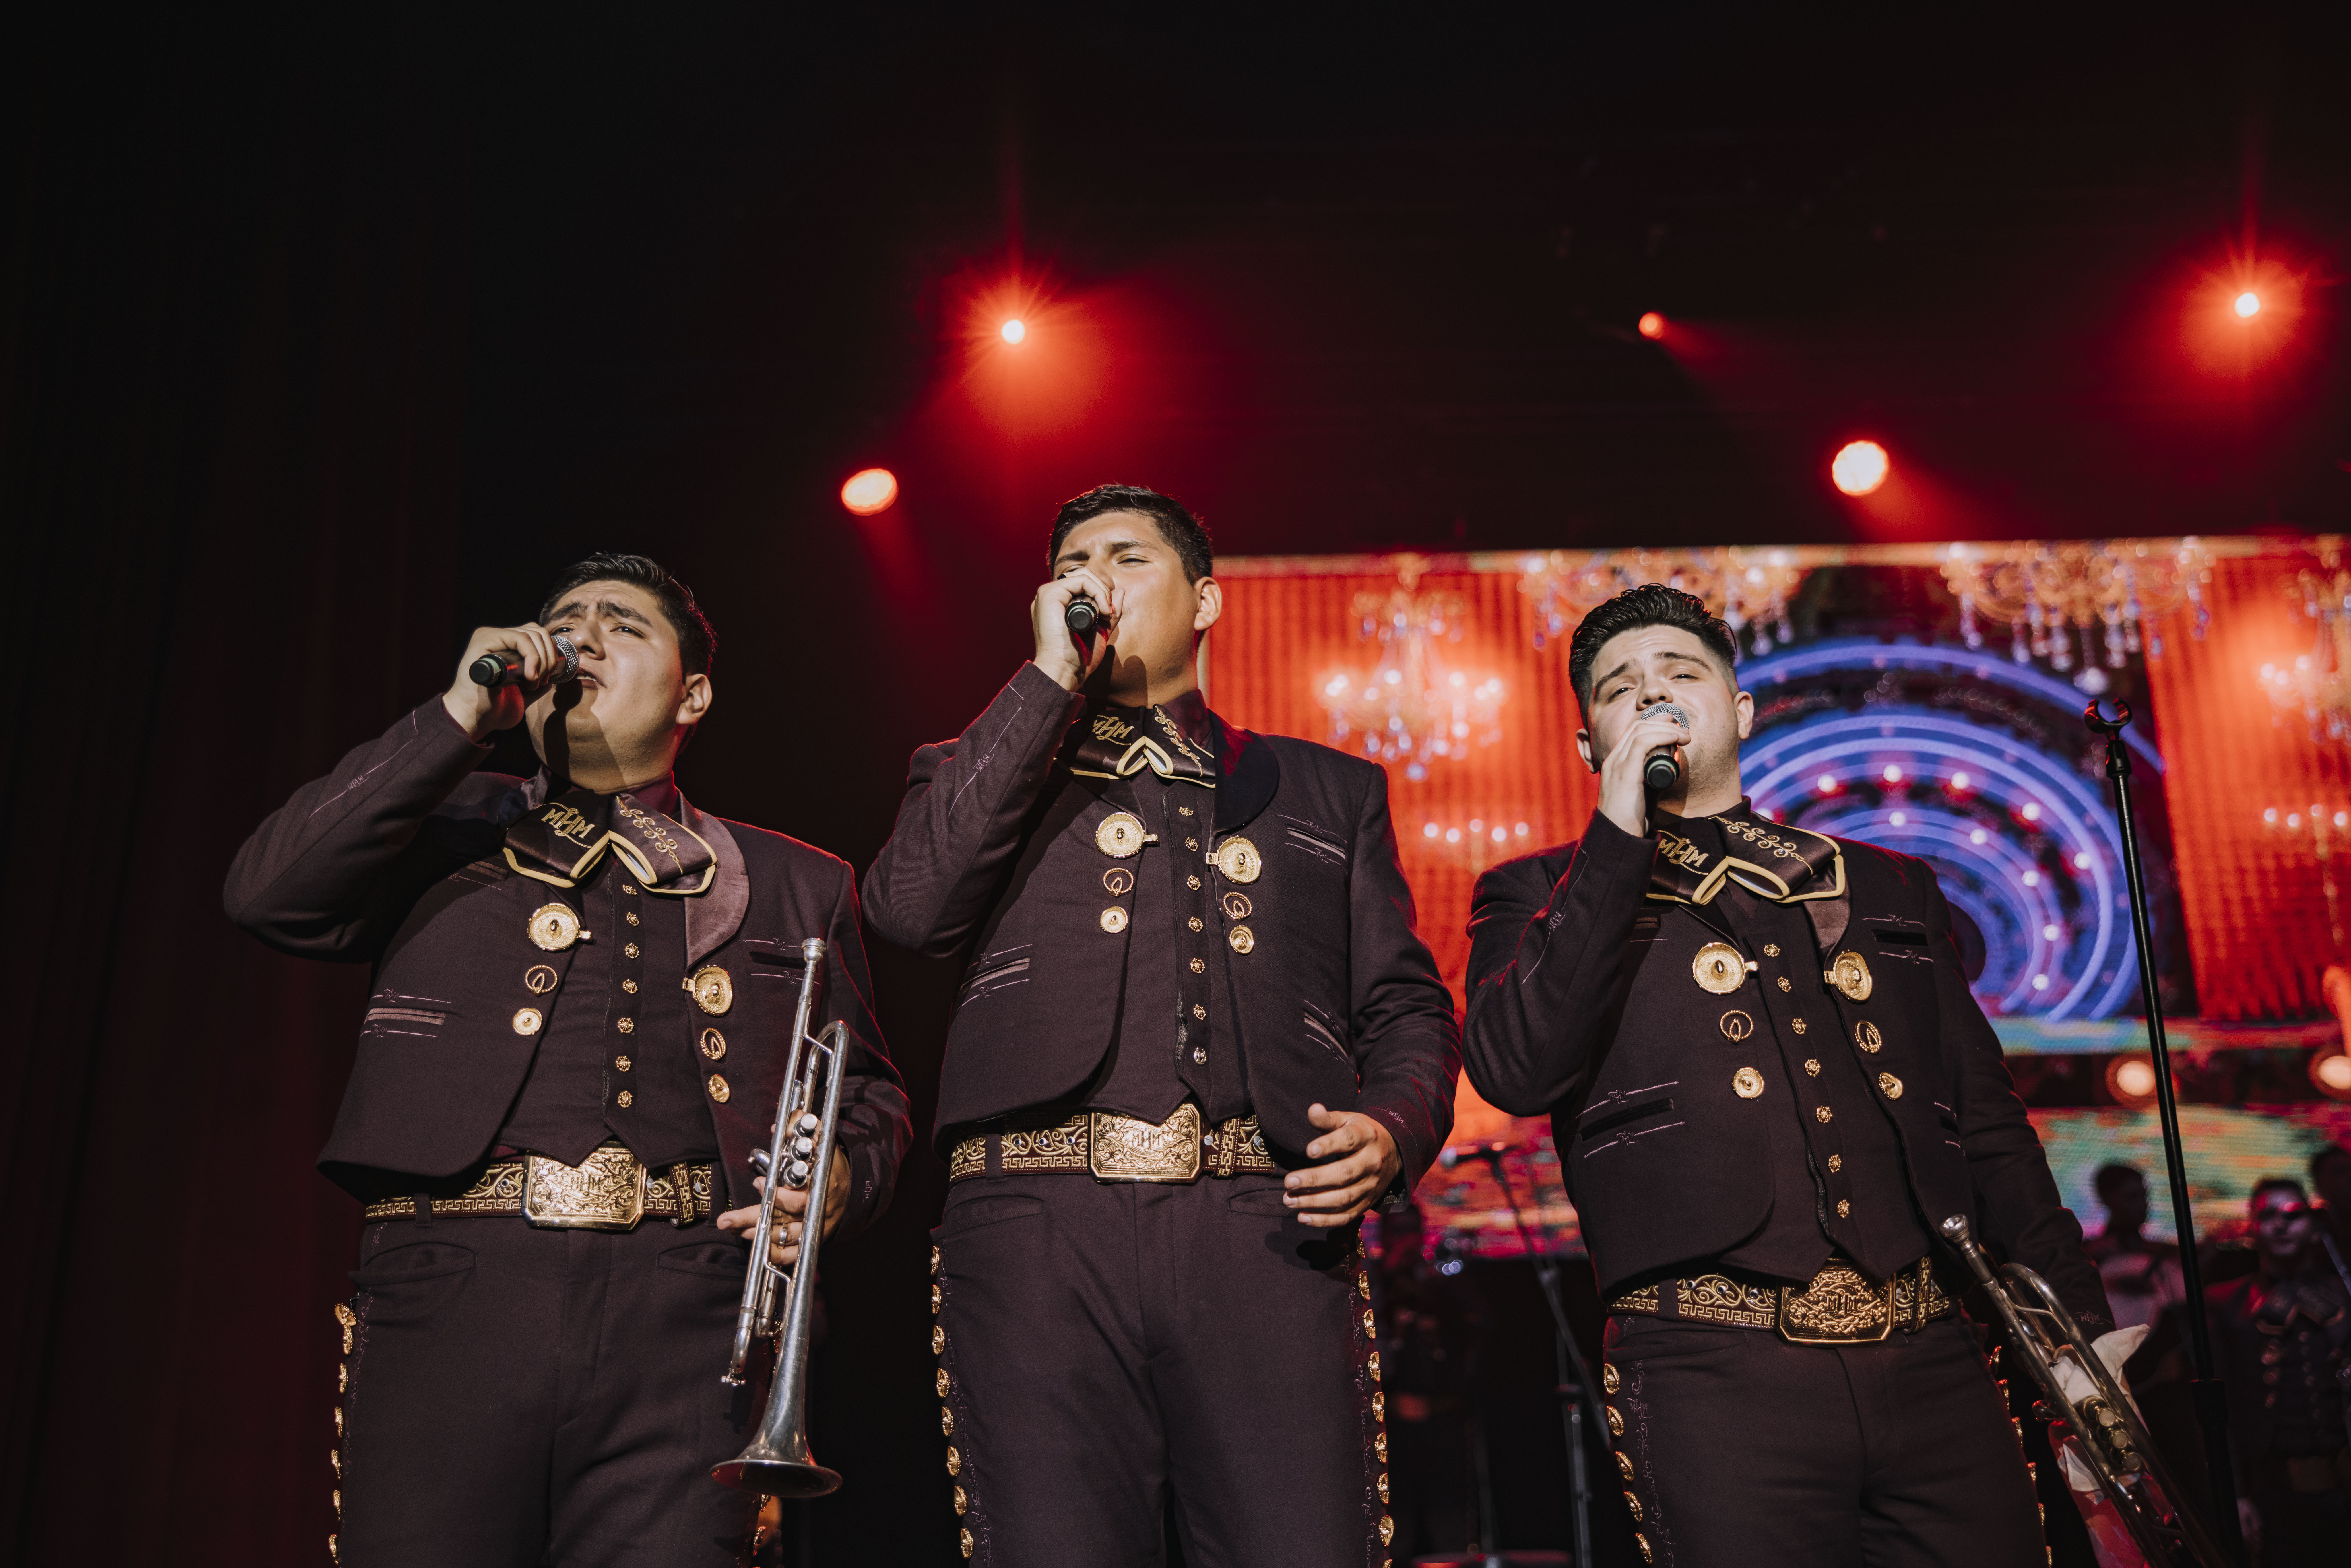 Color photo of three artists singing into hand mikes on a stage. They wear traditional costumes of the Mariachi.